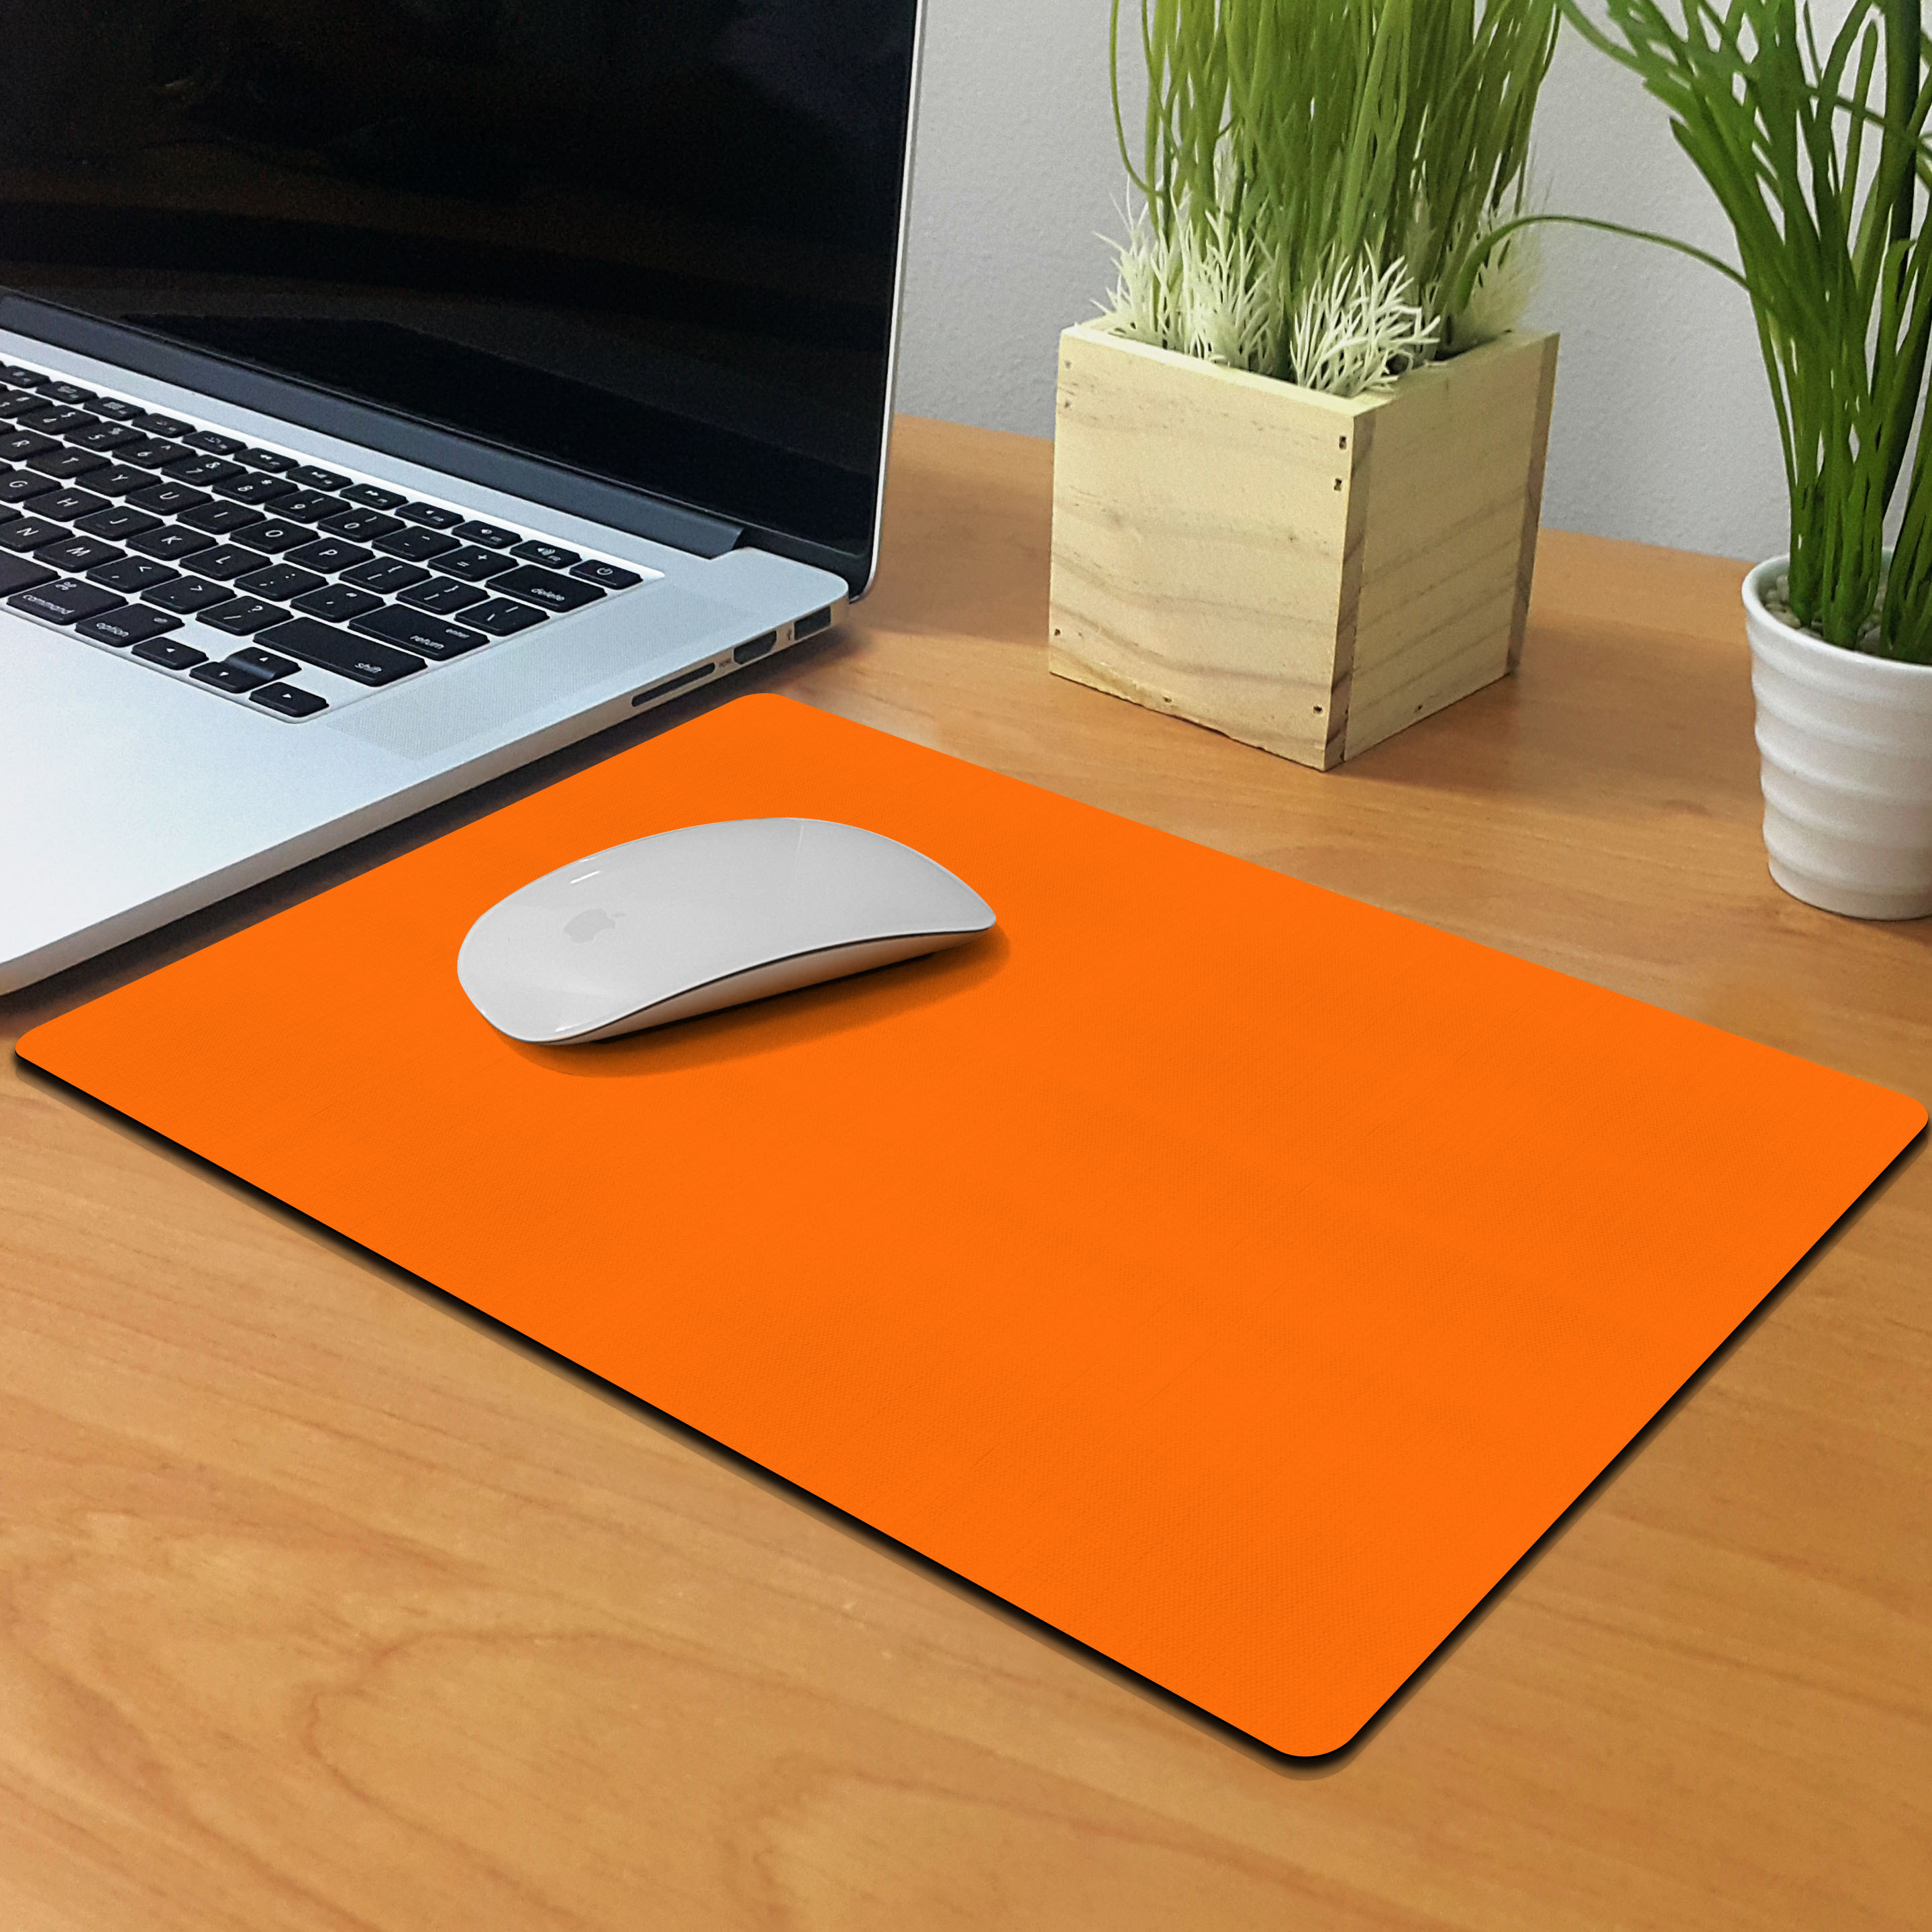 WIRESTER Super Size Rectangle Mouse Pad, Non-Slip X-Large Mouse Pad for Home, Office, and Gaming Desk - Solid Orange - image 4 of 5